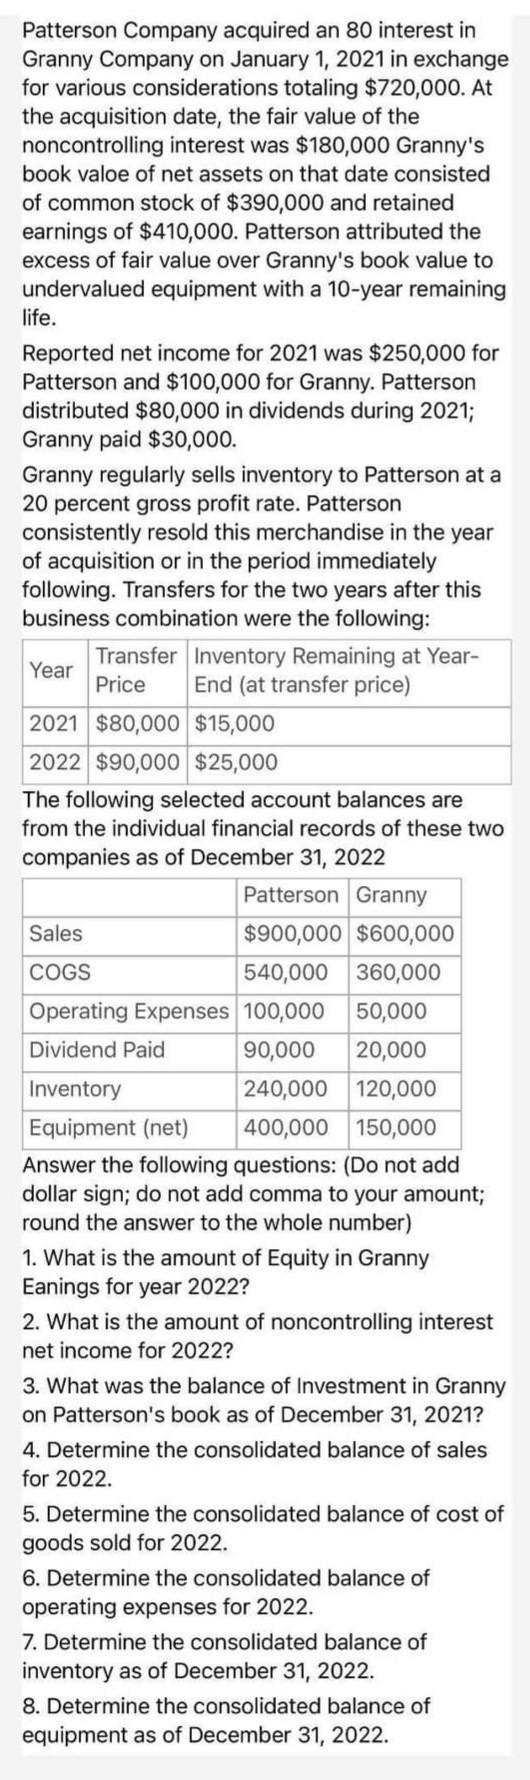 Patterson Company acquired an 80 interest in Granny Company on January 1, 2021 in exchange for various considerations totalin